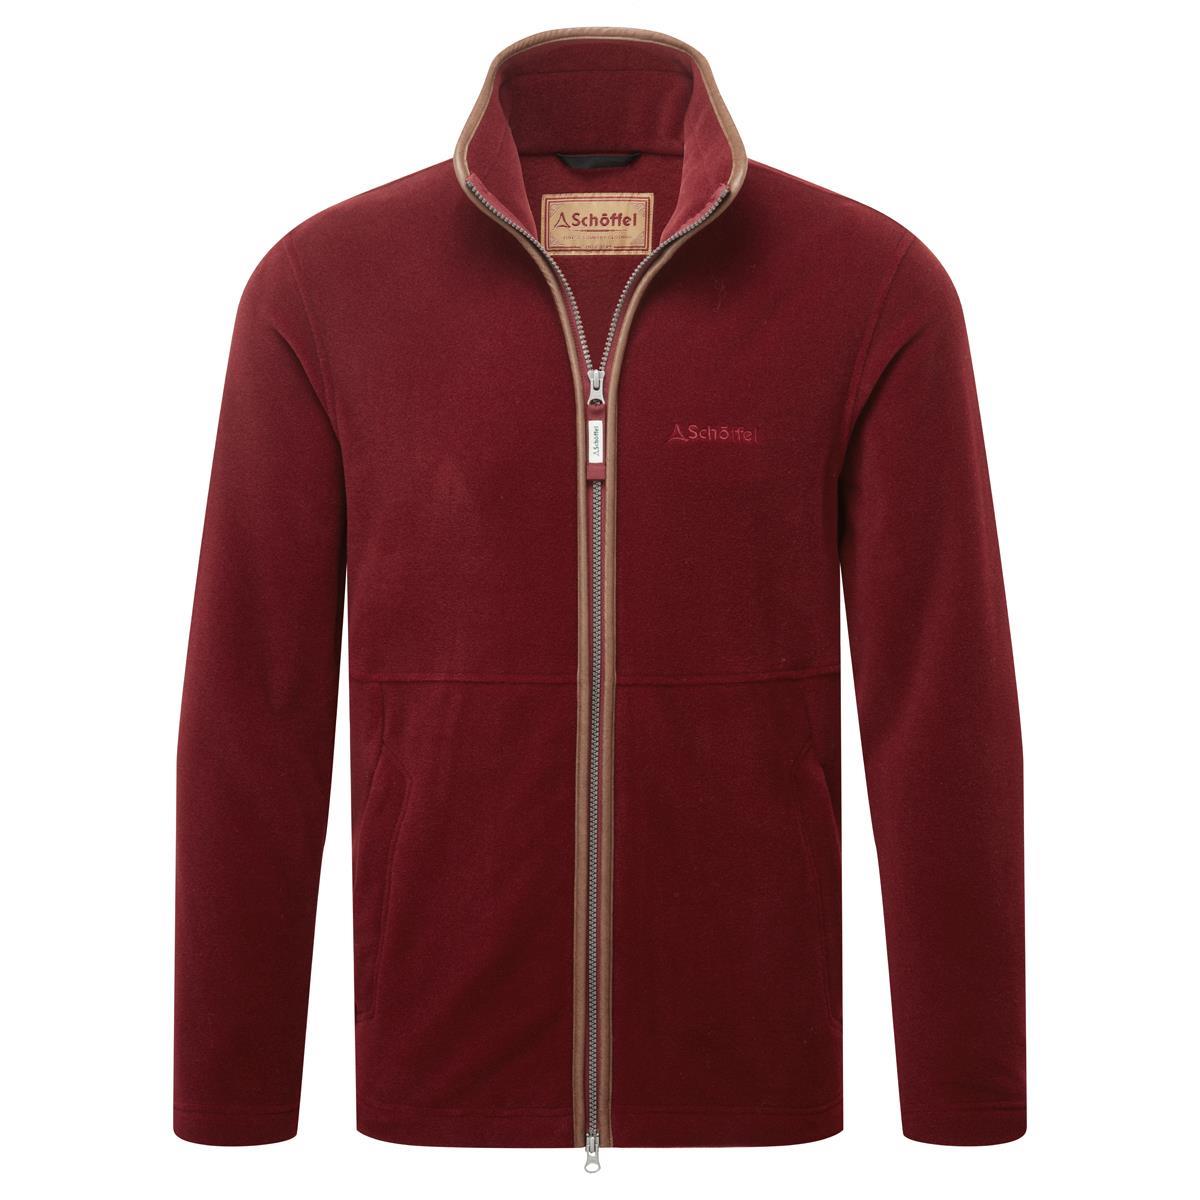 Schoffel Cottesmore Fleece Questions & Answers